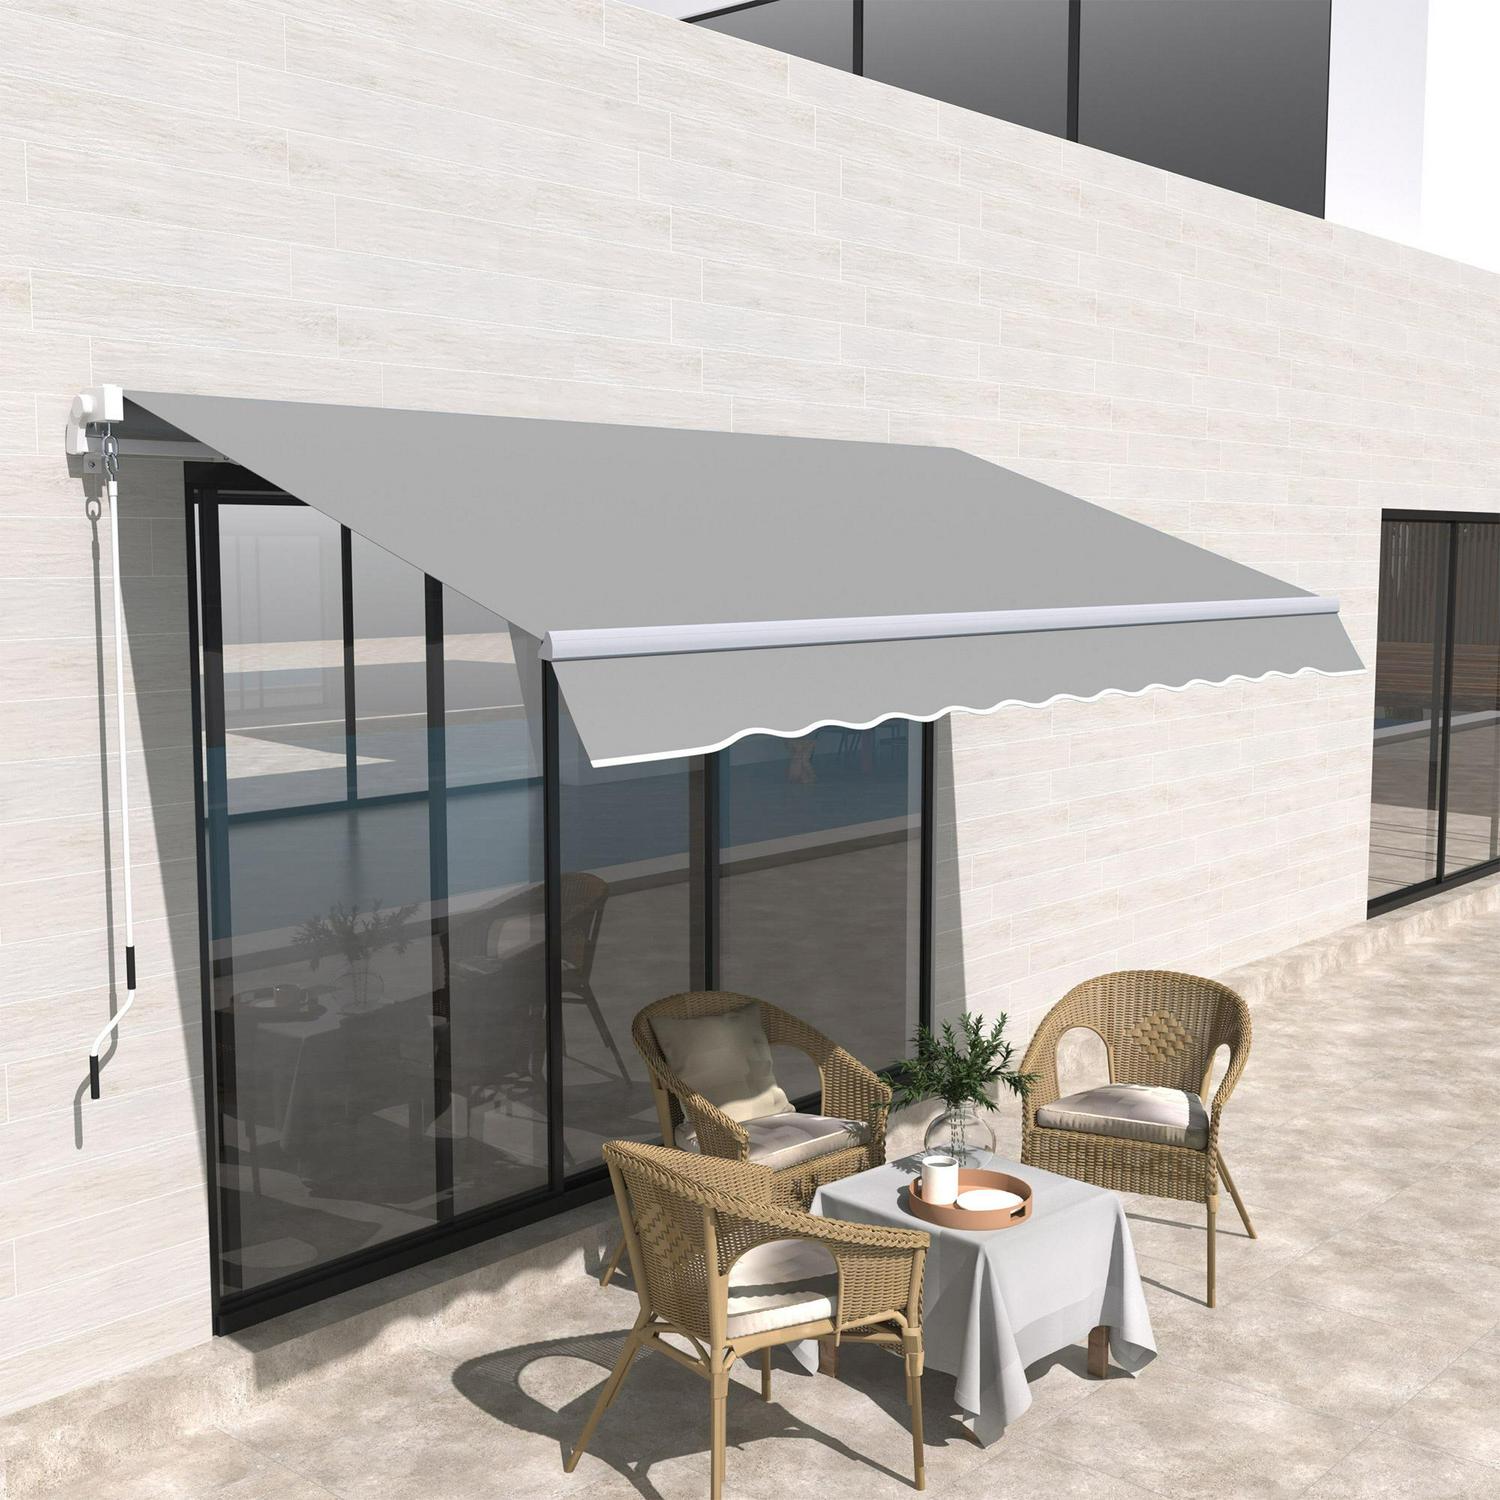 3 X 2m Awning Canopy Manual Retractable Porch Sun Shade Shelter Light Grey